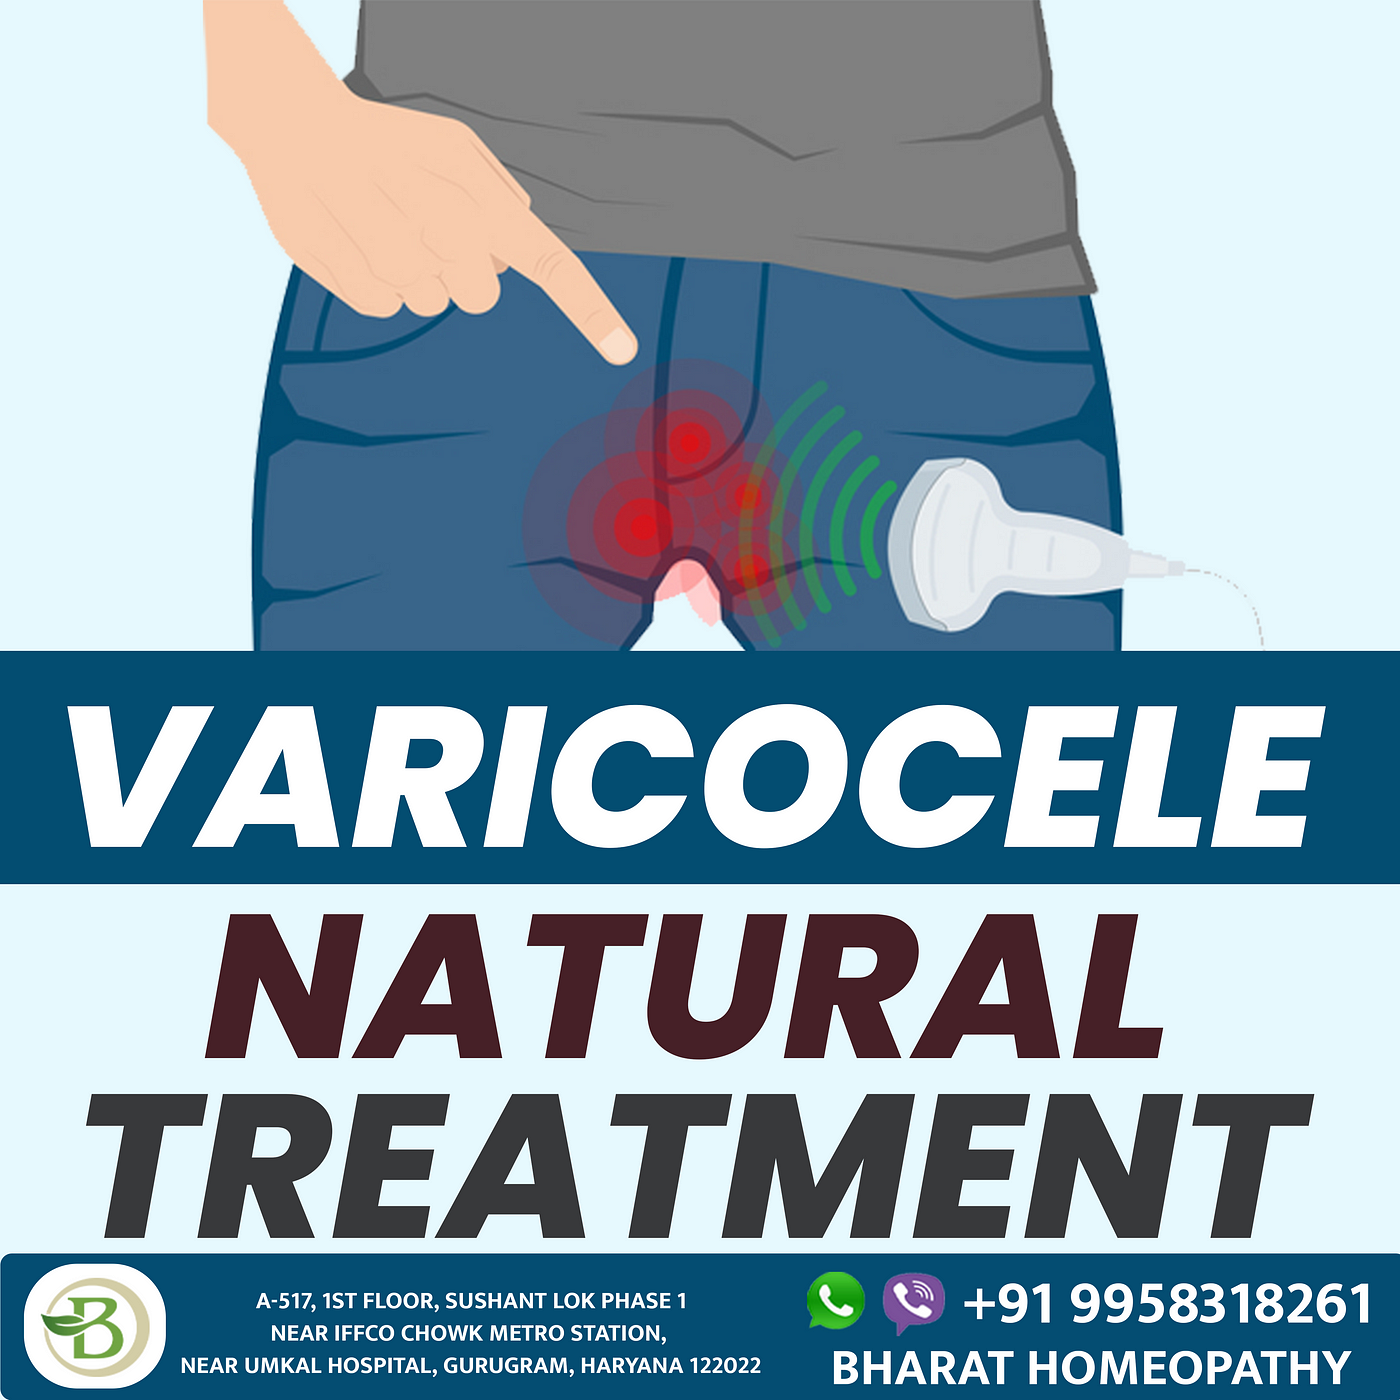 Effective Treatment Options for Varicocele: Exploring the Best Approaches, by bharat homeopathy